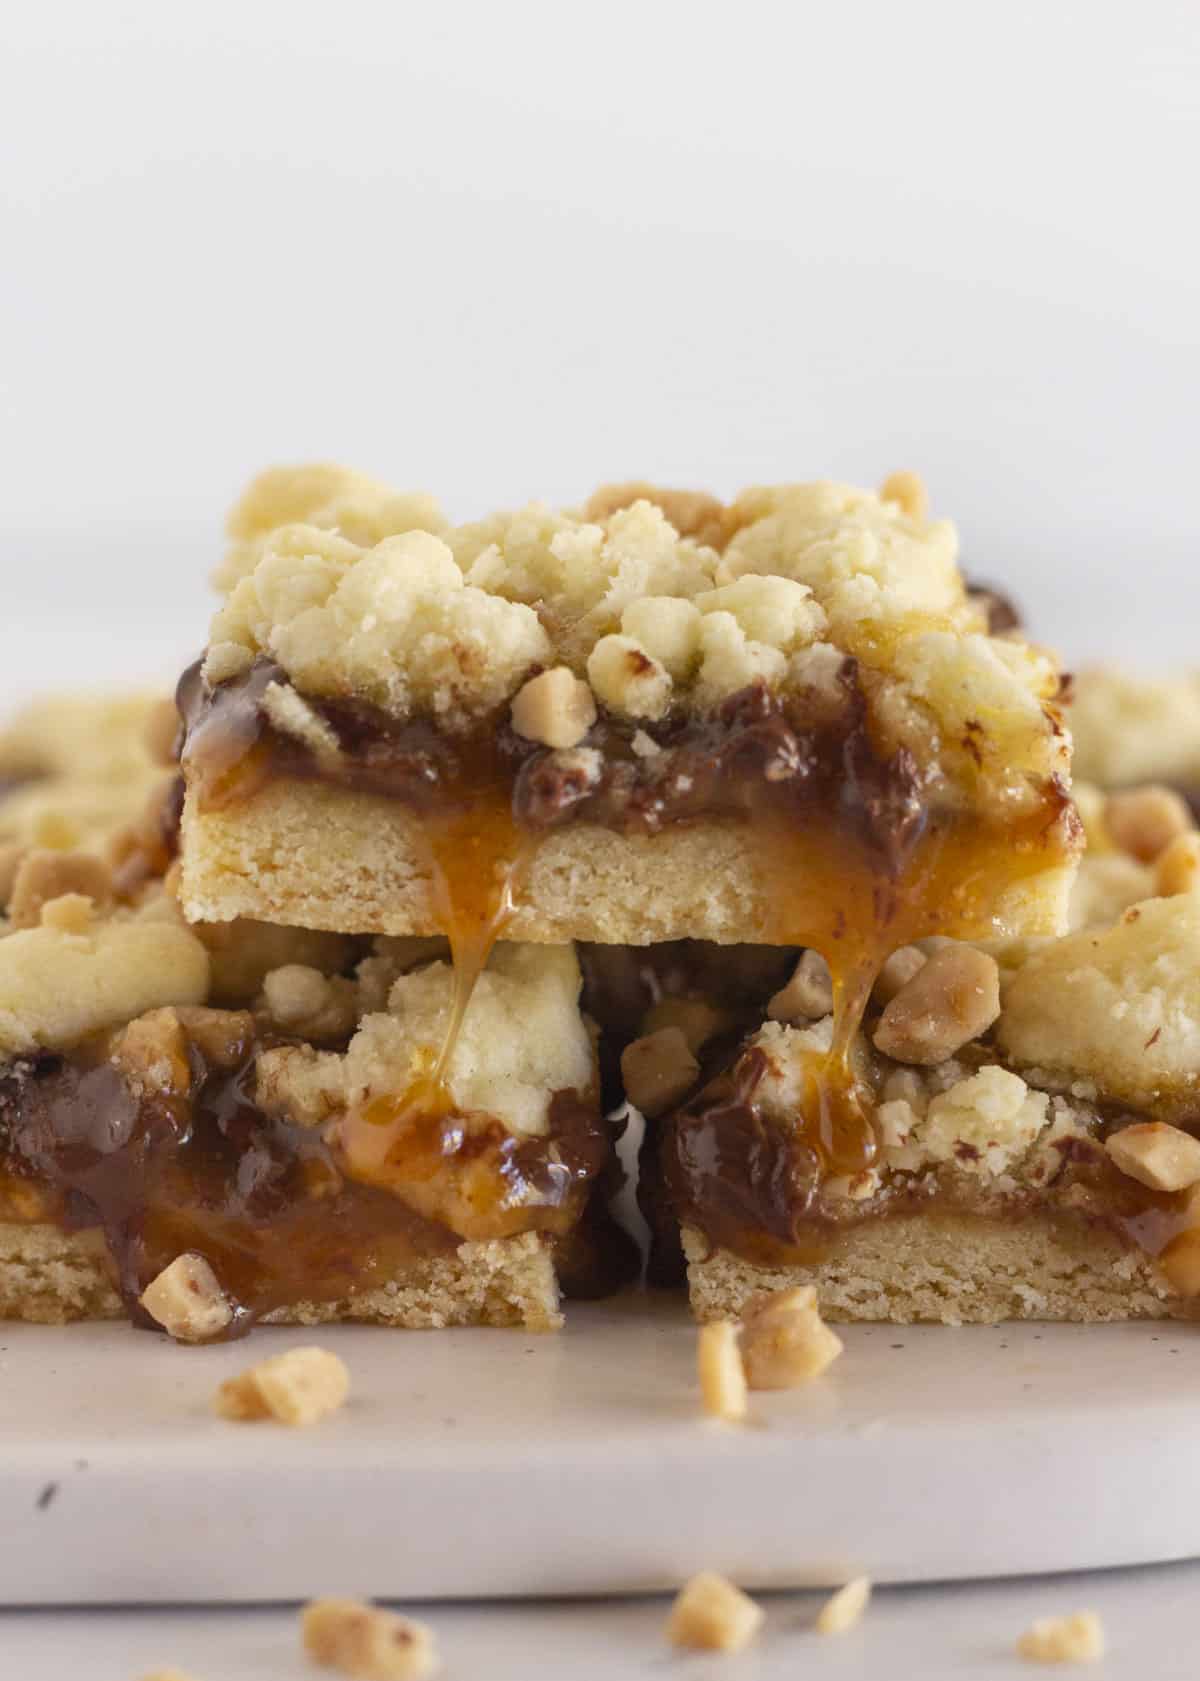 Toffee cookie bars stacked on each other with caramel and chocolate chips.